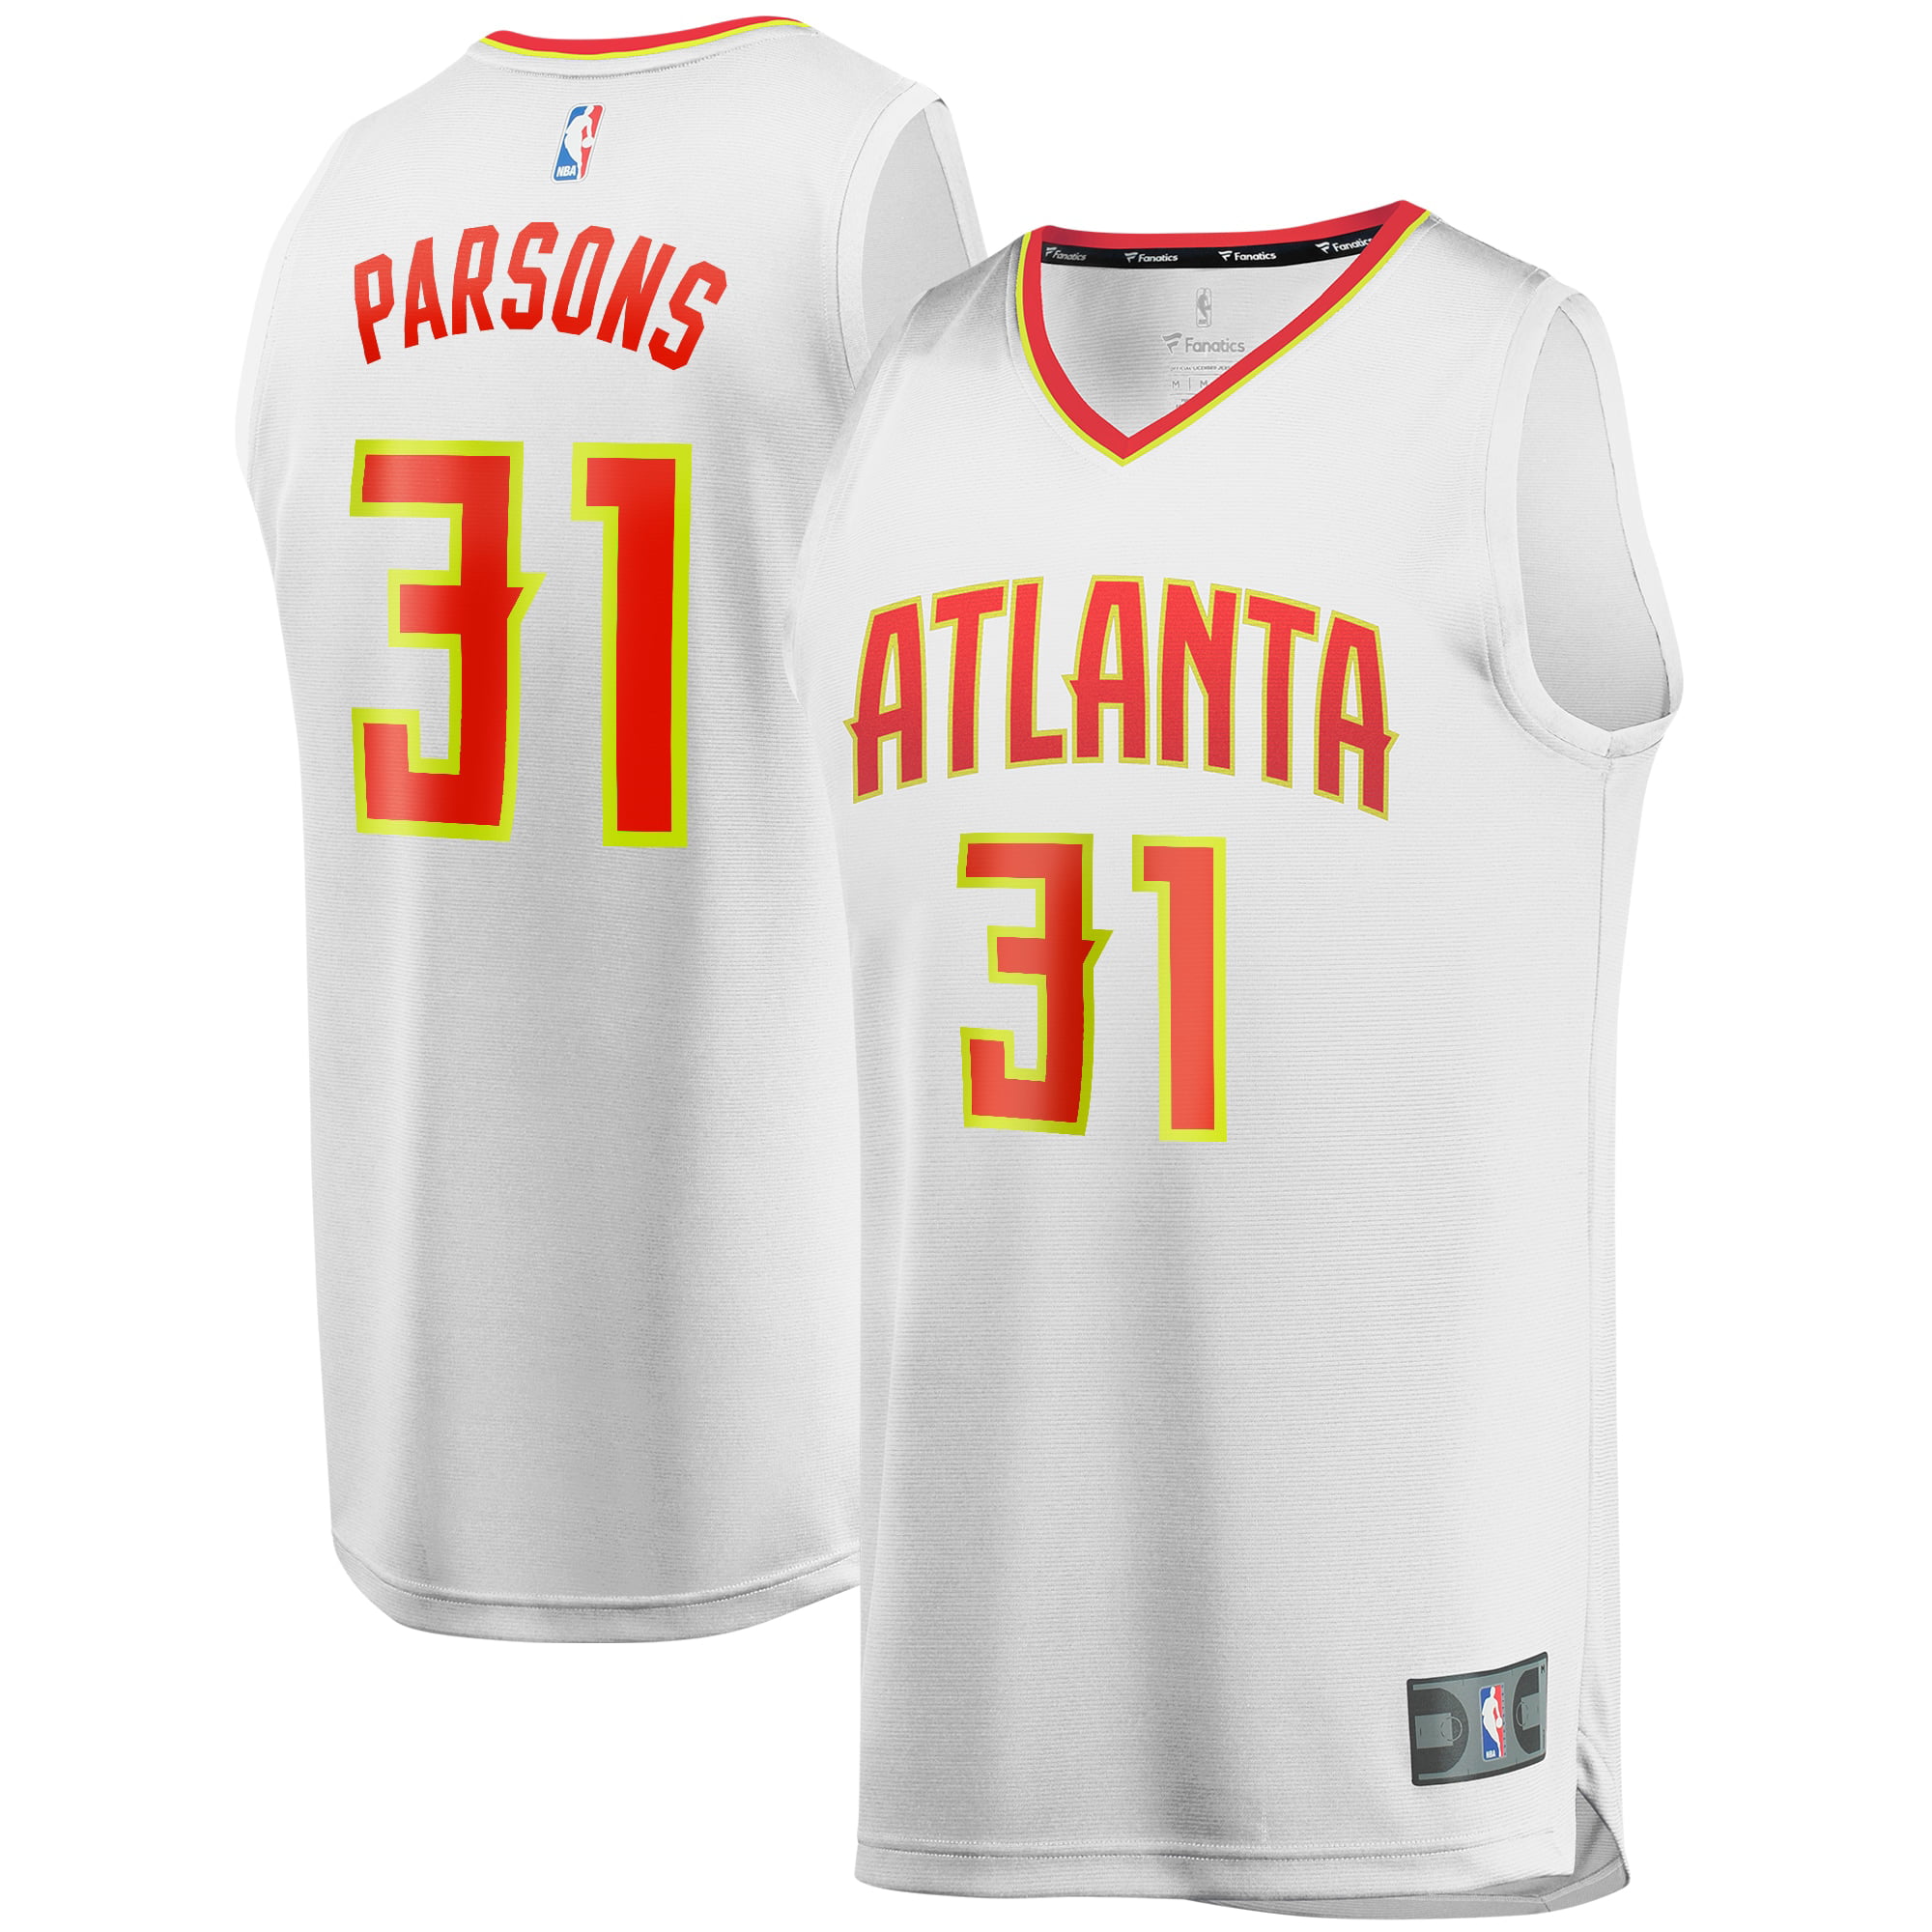 parsons jersey